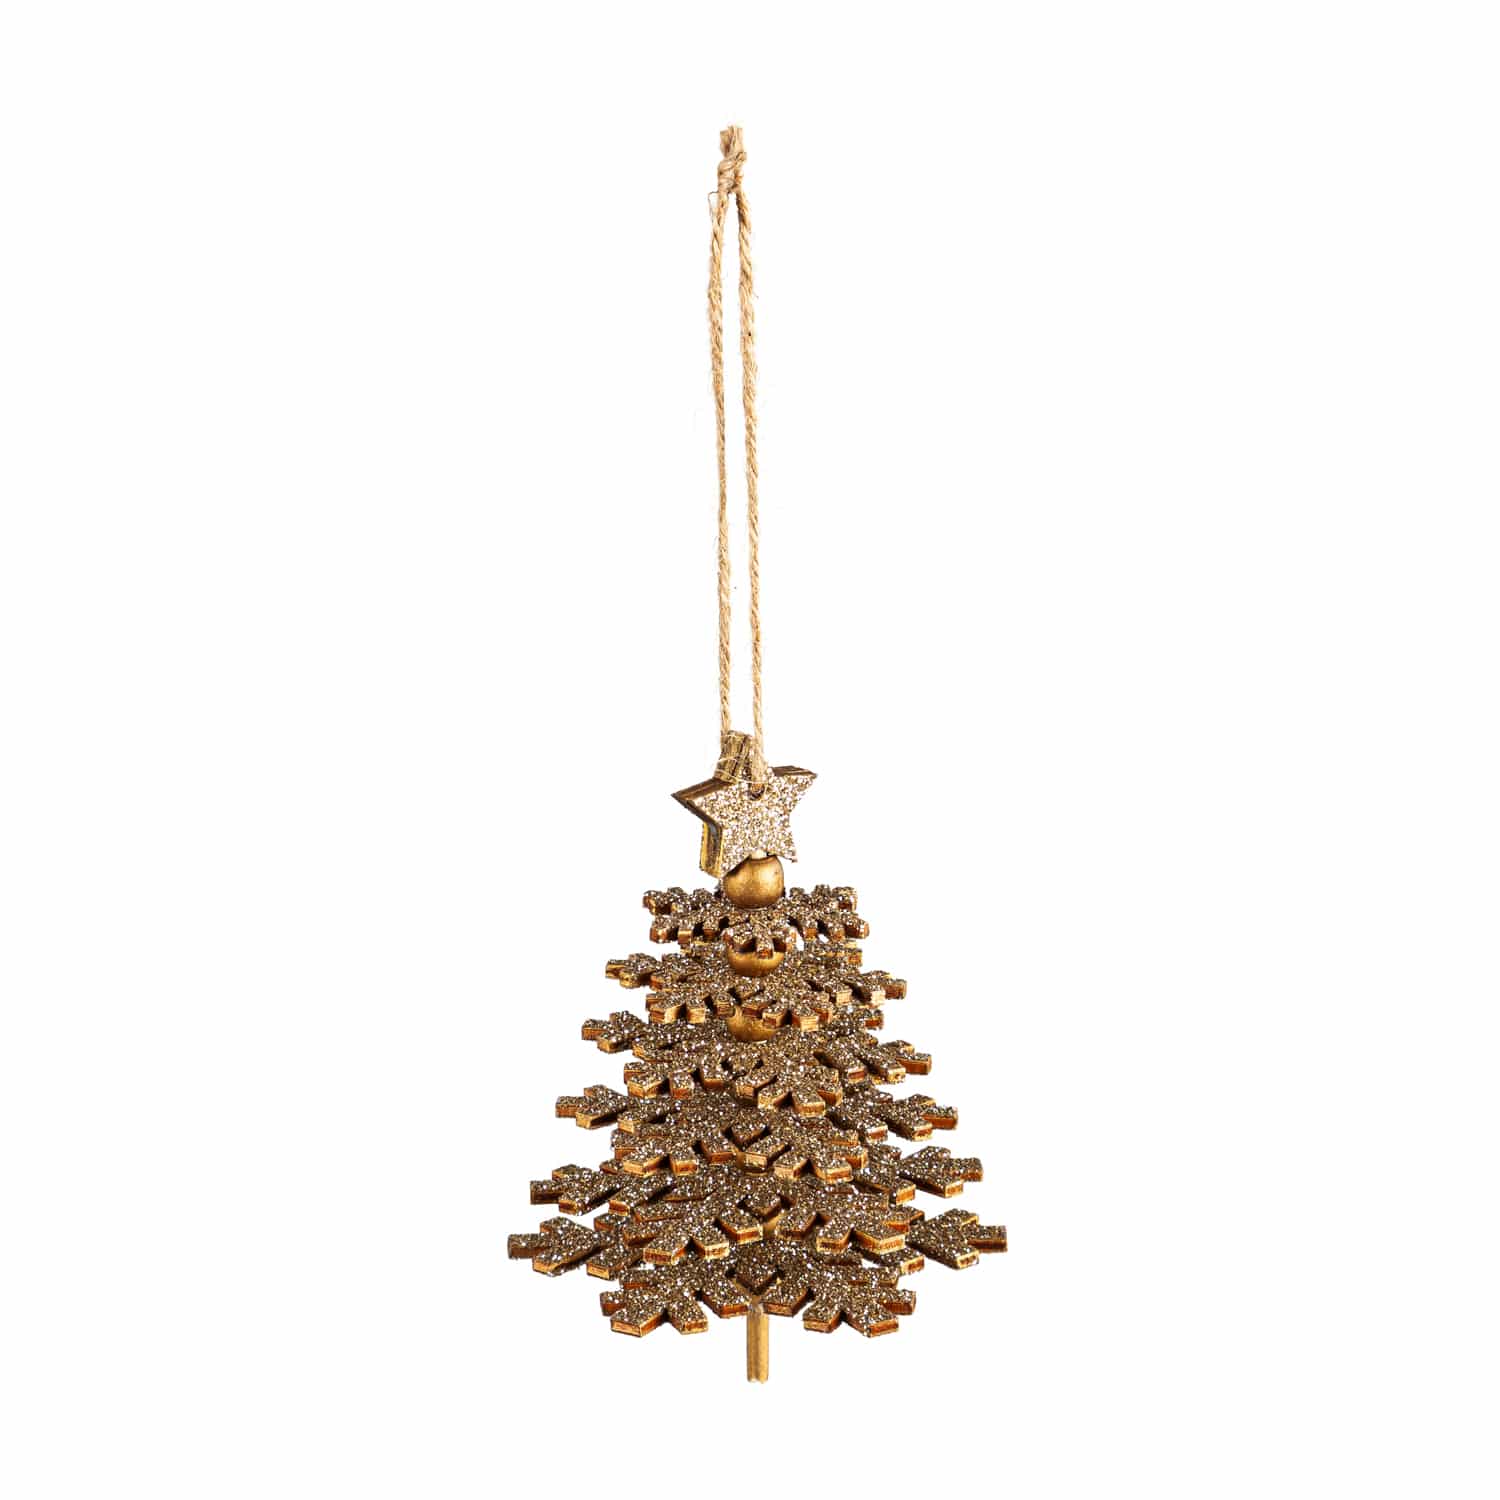 Wooden Christmas Tree Ornament image